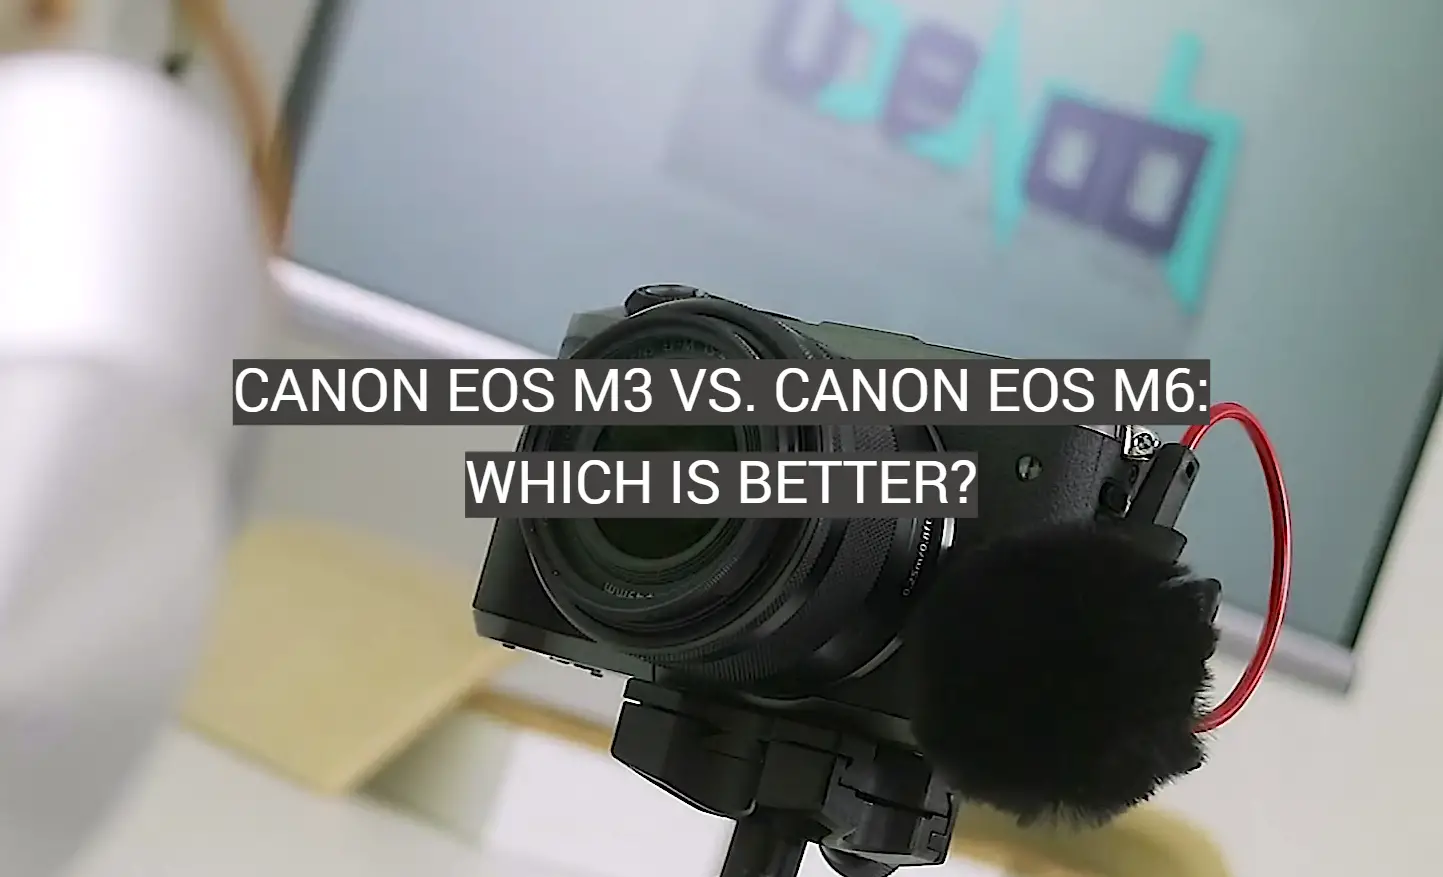 Canon EOS M3 vs. Canon EOS M6: Which is Better?